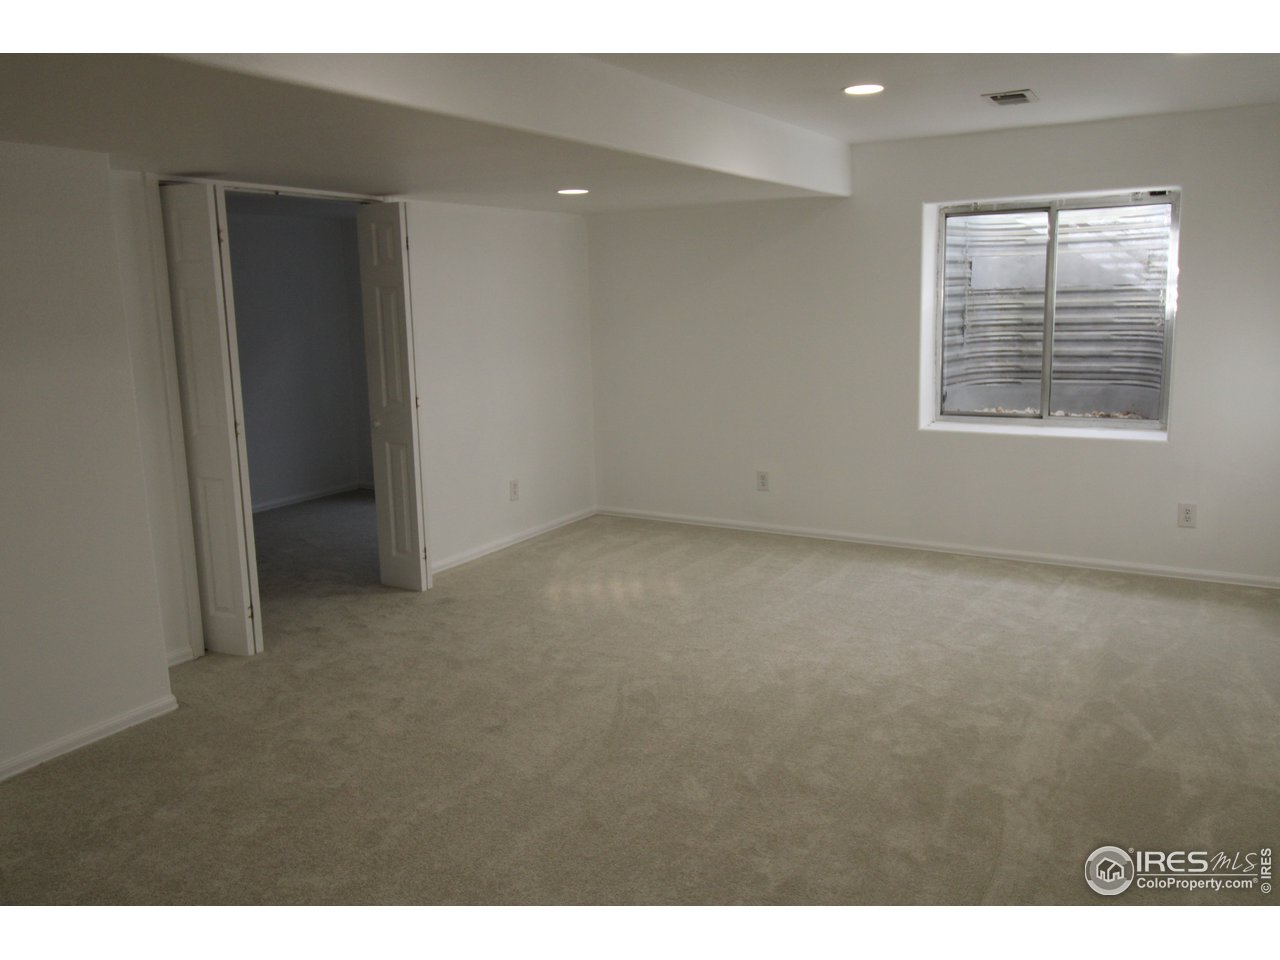 Big rec-room in basement with brand new carpeting.